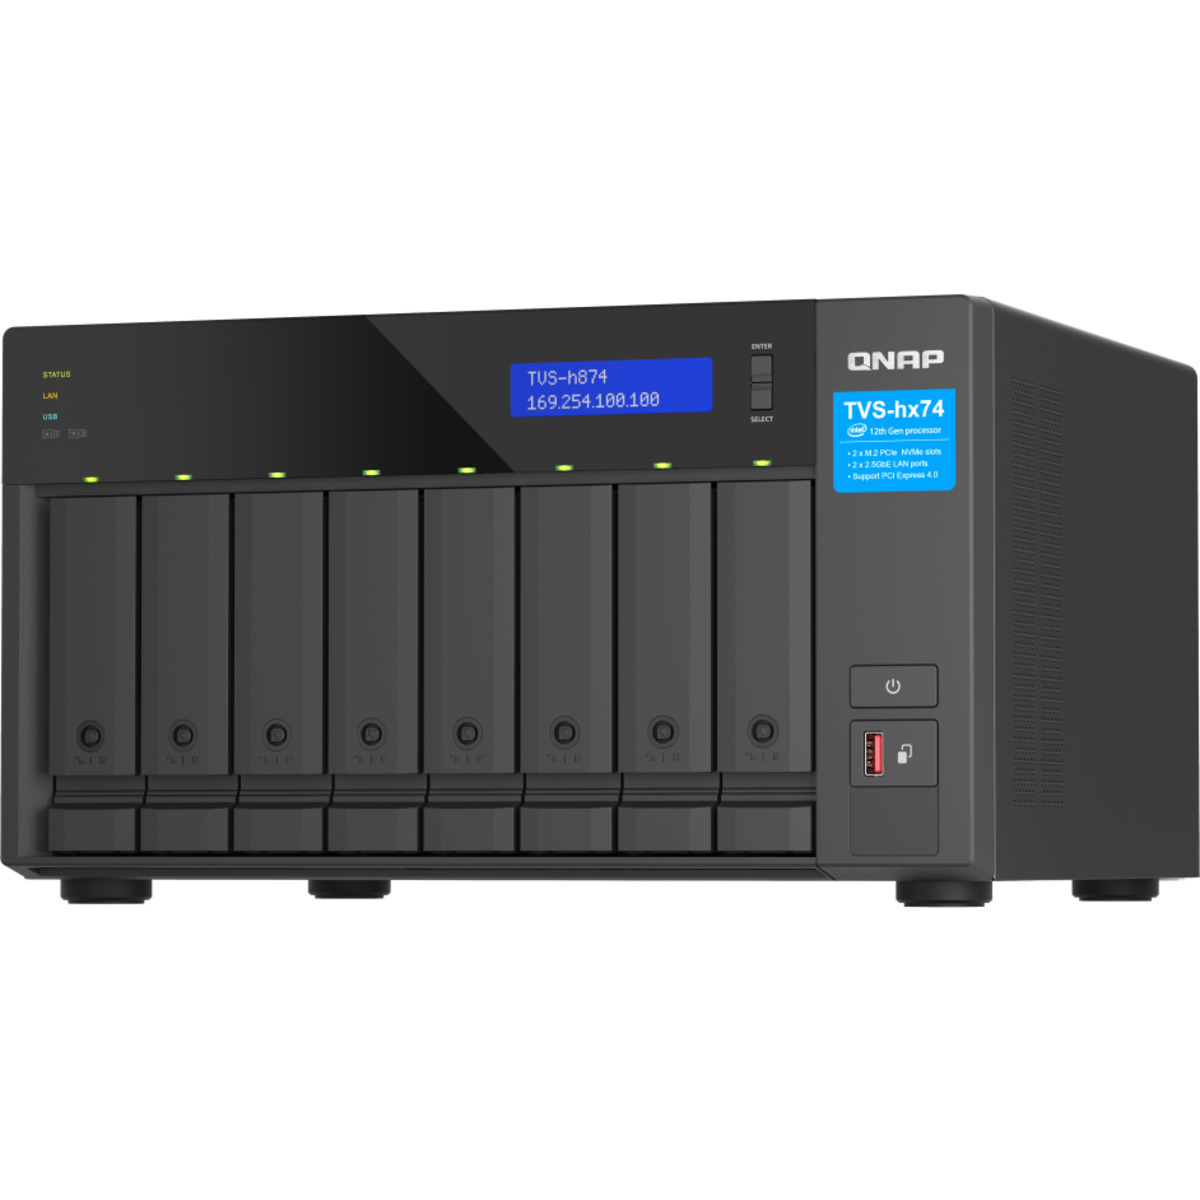 buy $6815 QNAP TVS-h874 Core i7 160tb Desktop NAS - Network Attached Storage Device 8x20000gb Western Digital Red Pro WD201KFGX 3.5 7200rpm SATA 6Gb/s HDD NAS Class Drives Installed - Burn-In Tested - nas headquarters buy network attached storage server device das new raid-5 free shipping simply usa TVS-h874 Core i7